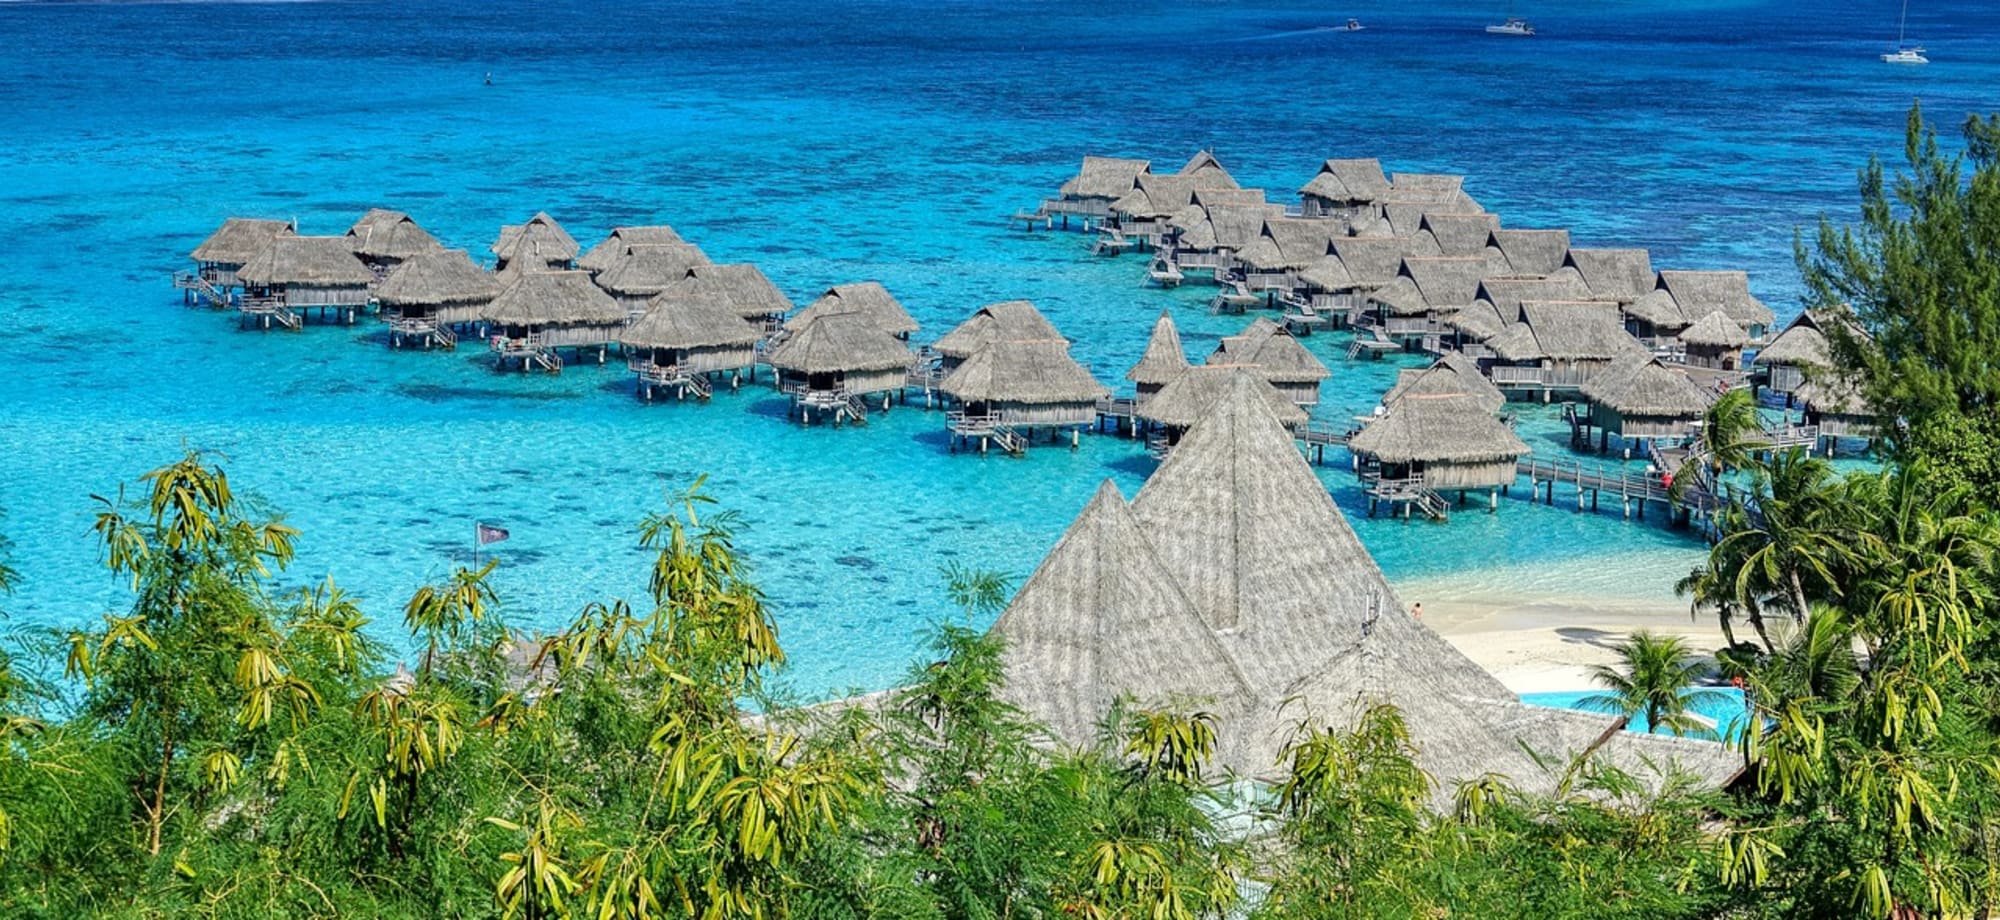 Overwater villas in Mo'orea are surrounded by trees, sand and the turquoise ocean. 